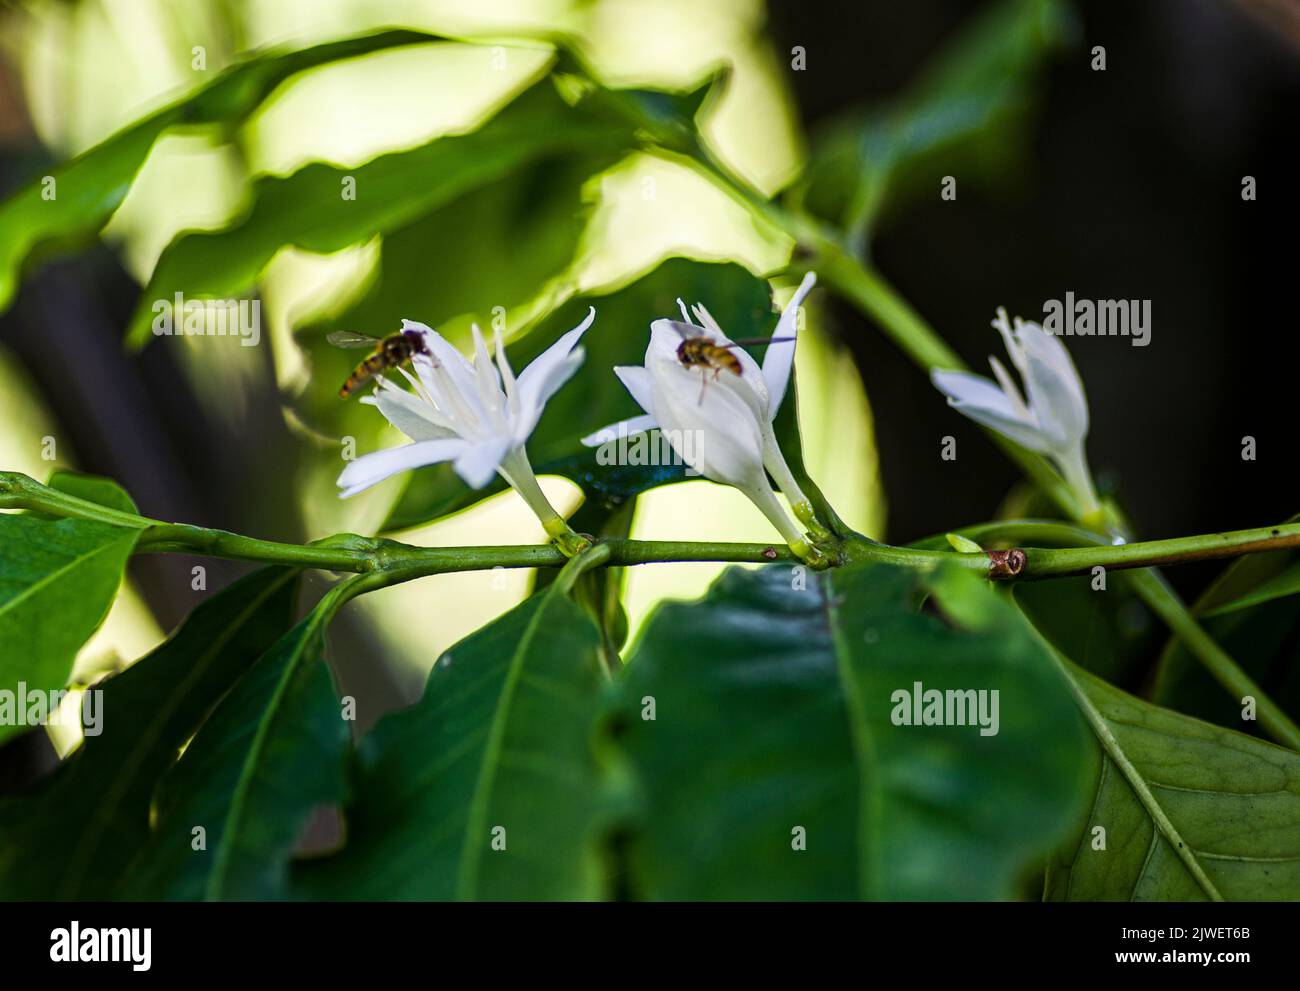 A twig of blooming coffee, with insects, pollinating the flowers Stock Photo